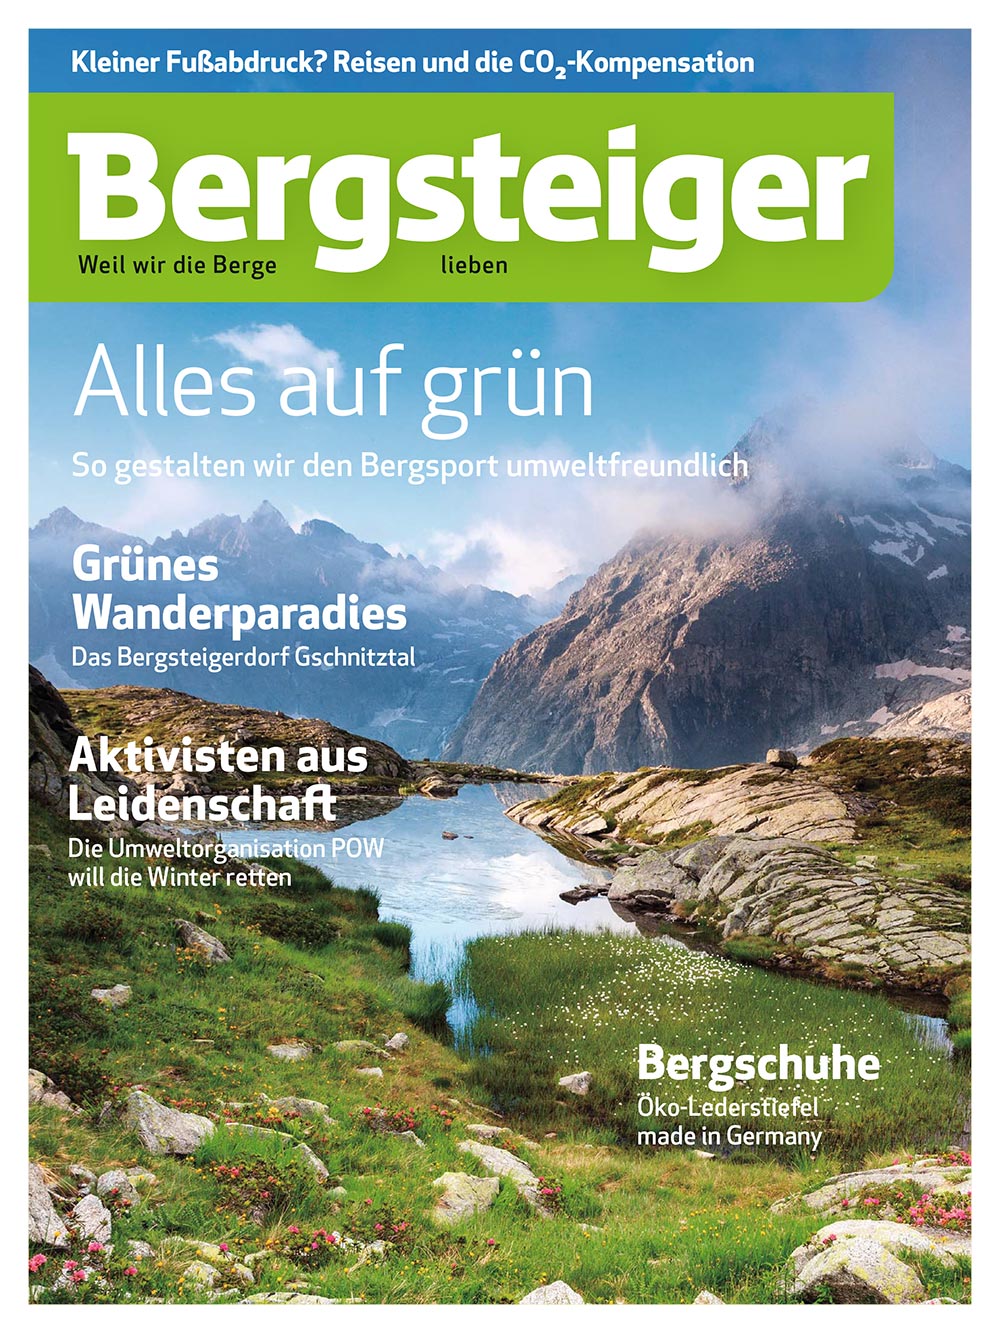 "Everything on green" in Bergsteiger Magazin